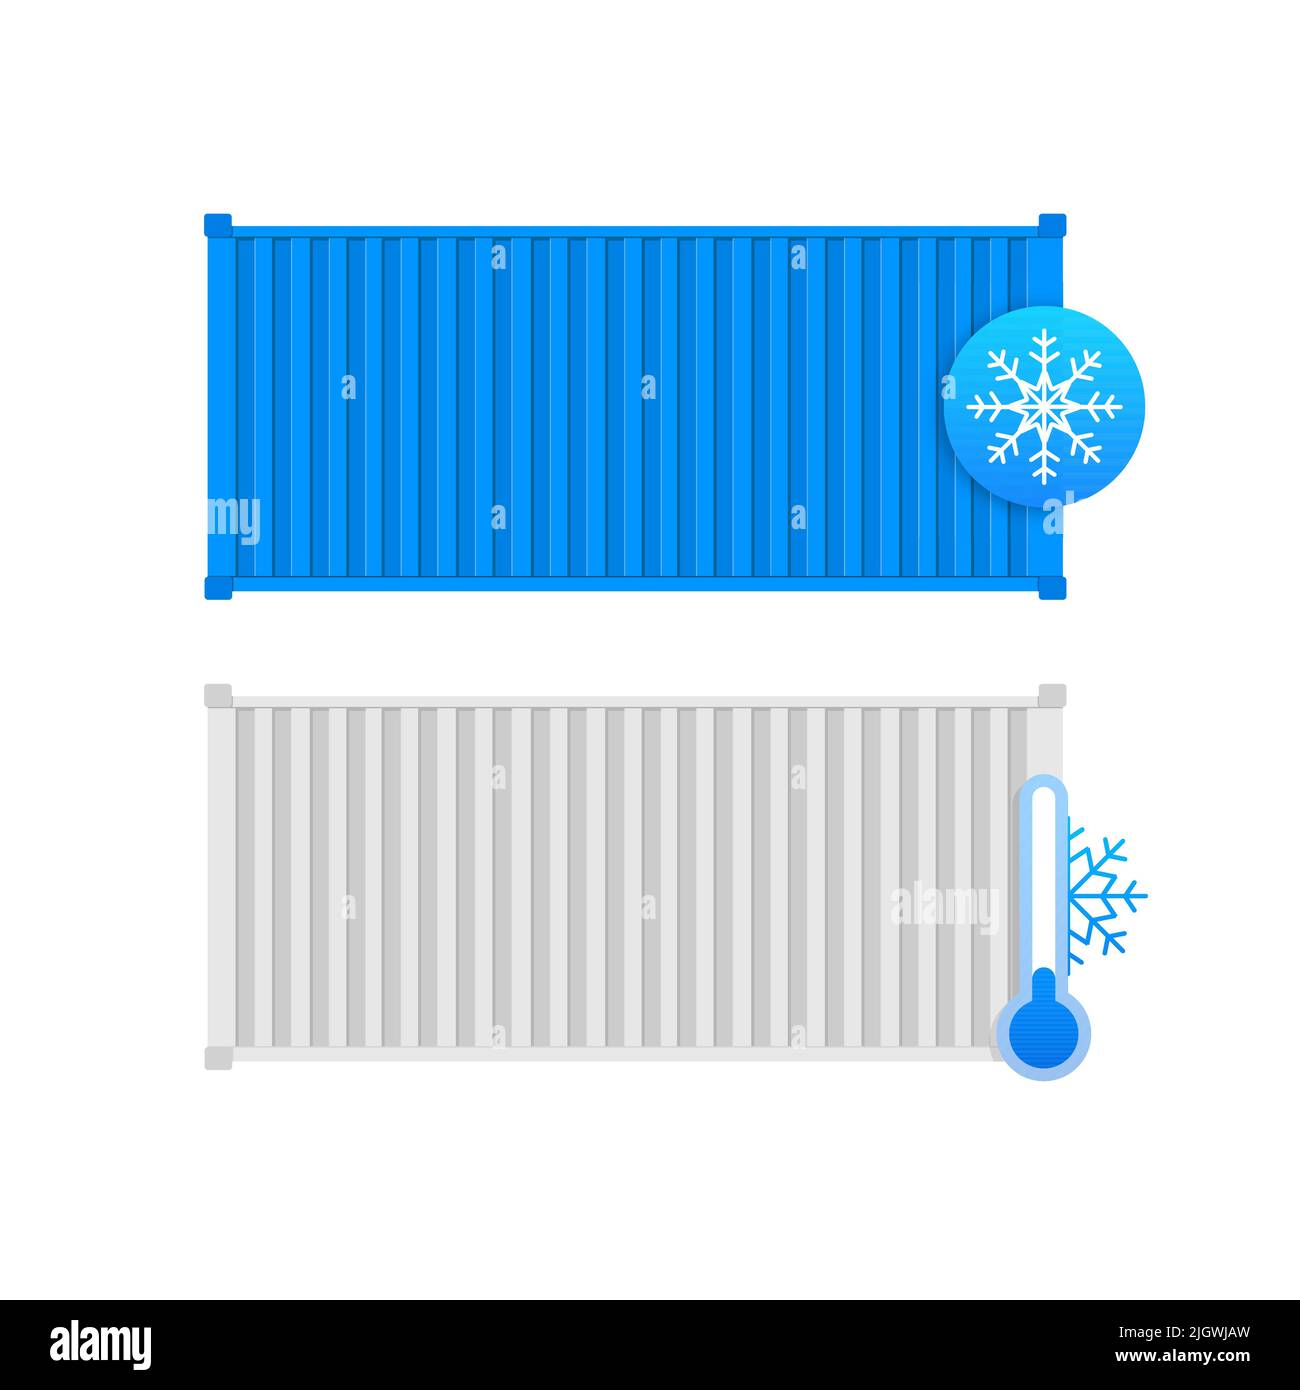 Reefer, Refrigerator container. Cool container use for transport. Vector stock illustration. Stock Vector